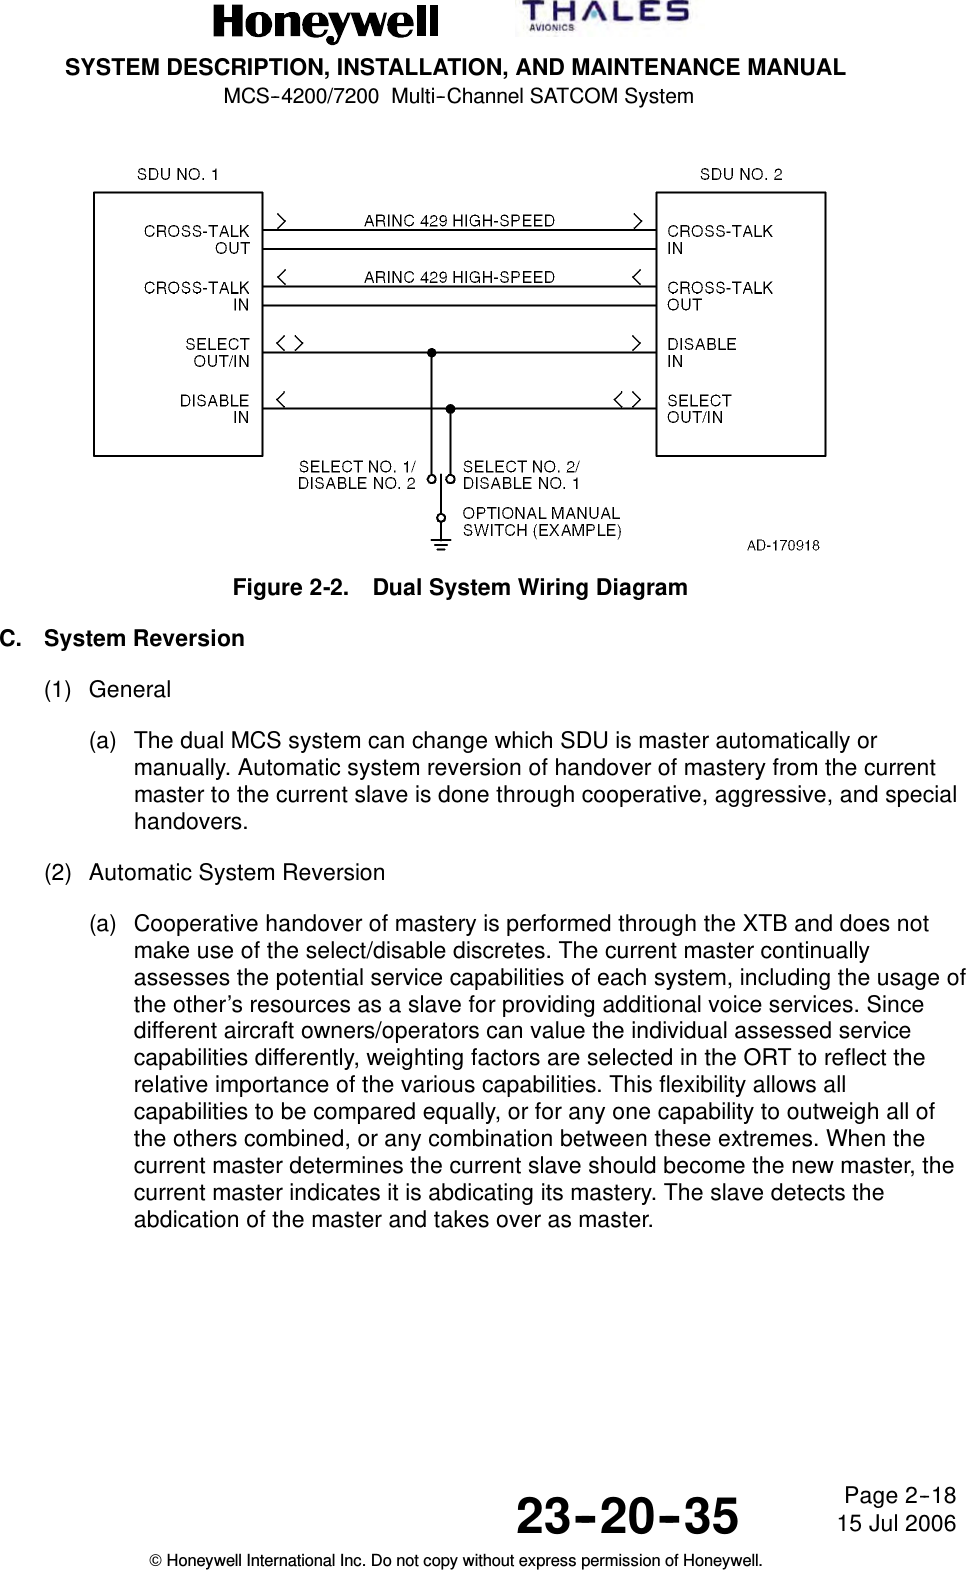 SYSTEM DESCRIPTION, INSTALLATION, AND MAINTENANCE MANUALMCS--4200/7200 Multi--Channel SATCOM System23--20--35 15 Jul 2006Honeywell International Inc. Do not copy without express permission of Honeywell.Page 2--18Figure 2-2. Dual System Wiring DiagramC. System Reversion(1) General(a) The dual MCS system can change which SDU is master automatically ormanually. Automatic system reversion of handover of mastery from the currentmaster to the current slave is done through cooperative, aggressive, and specialhandovers.(2) Automatic System Reversion(a) Cooperative handover of mastery is performed through the XTB and does notmake use of the select/disable discretes. The current master continuallyassesses the potential service capabilities of each system, including the usage ofthe other’s resources as a slave for providing additional voice services. Sincedifferent aircraft owners/operators can value the individual assessed servicecapabilities differently, weighting factors are selected in the ORT to reflect therelative importance of the various capabilities. This flexibility allows allcapabilities to be compared equally, or for any one capability to outweigh all ofthe others combined, or any combination between these extremes. When thecurrent master determines the current slave should become the new master, thecurrent master indicates it is abdicating its mastery. The slave detects theabdication of the master and takes over as master.